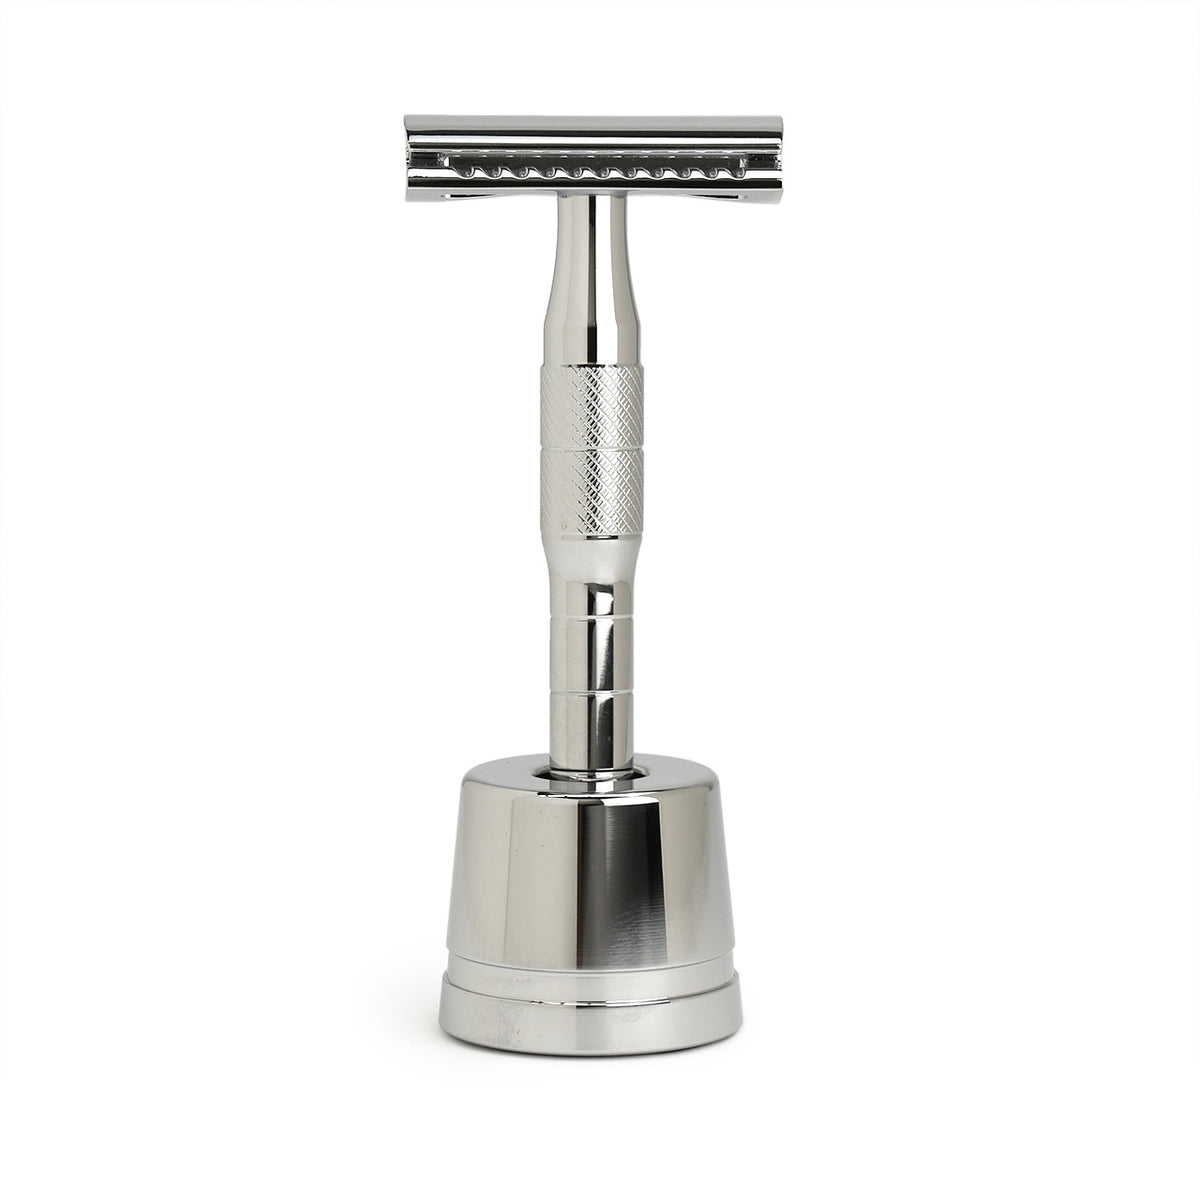 Daily Shaver Safety Razor and stand with chrome finish